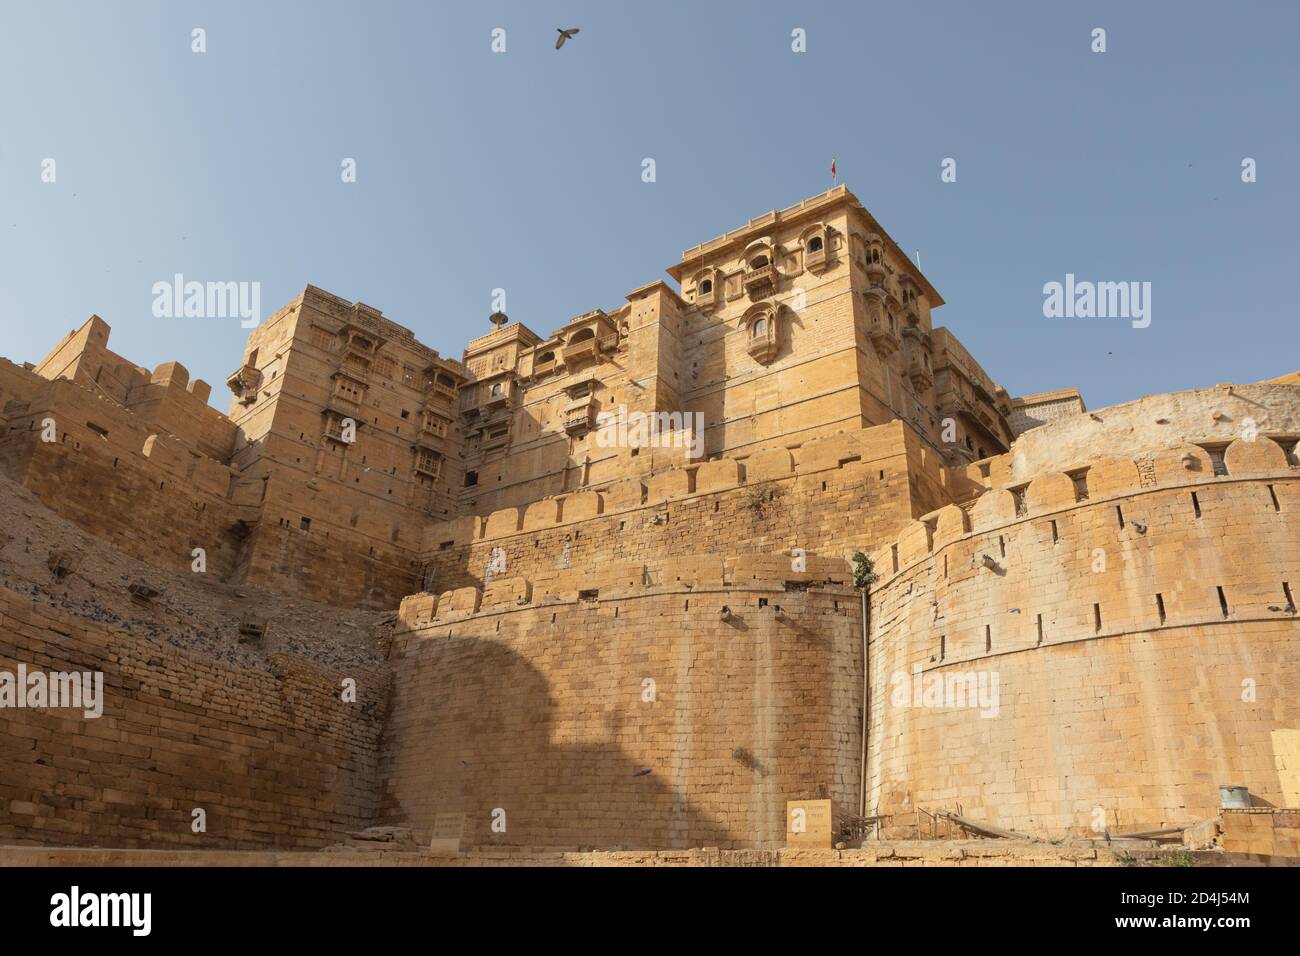 Front view of Jaisalmer fort taken from low angle with blue sky on horizon at Jaisalmer, India on 19 February 2018 Stock Photo